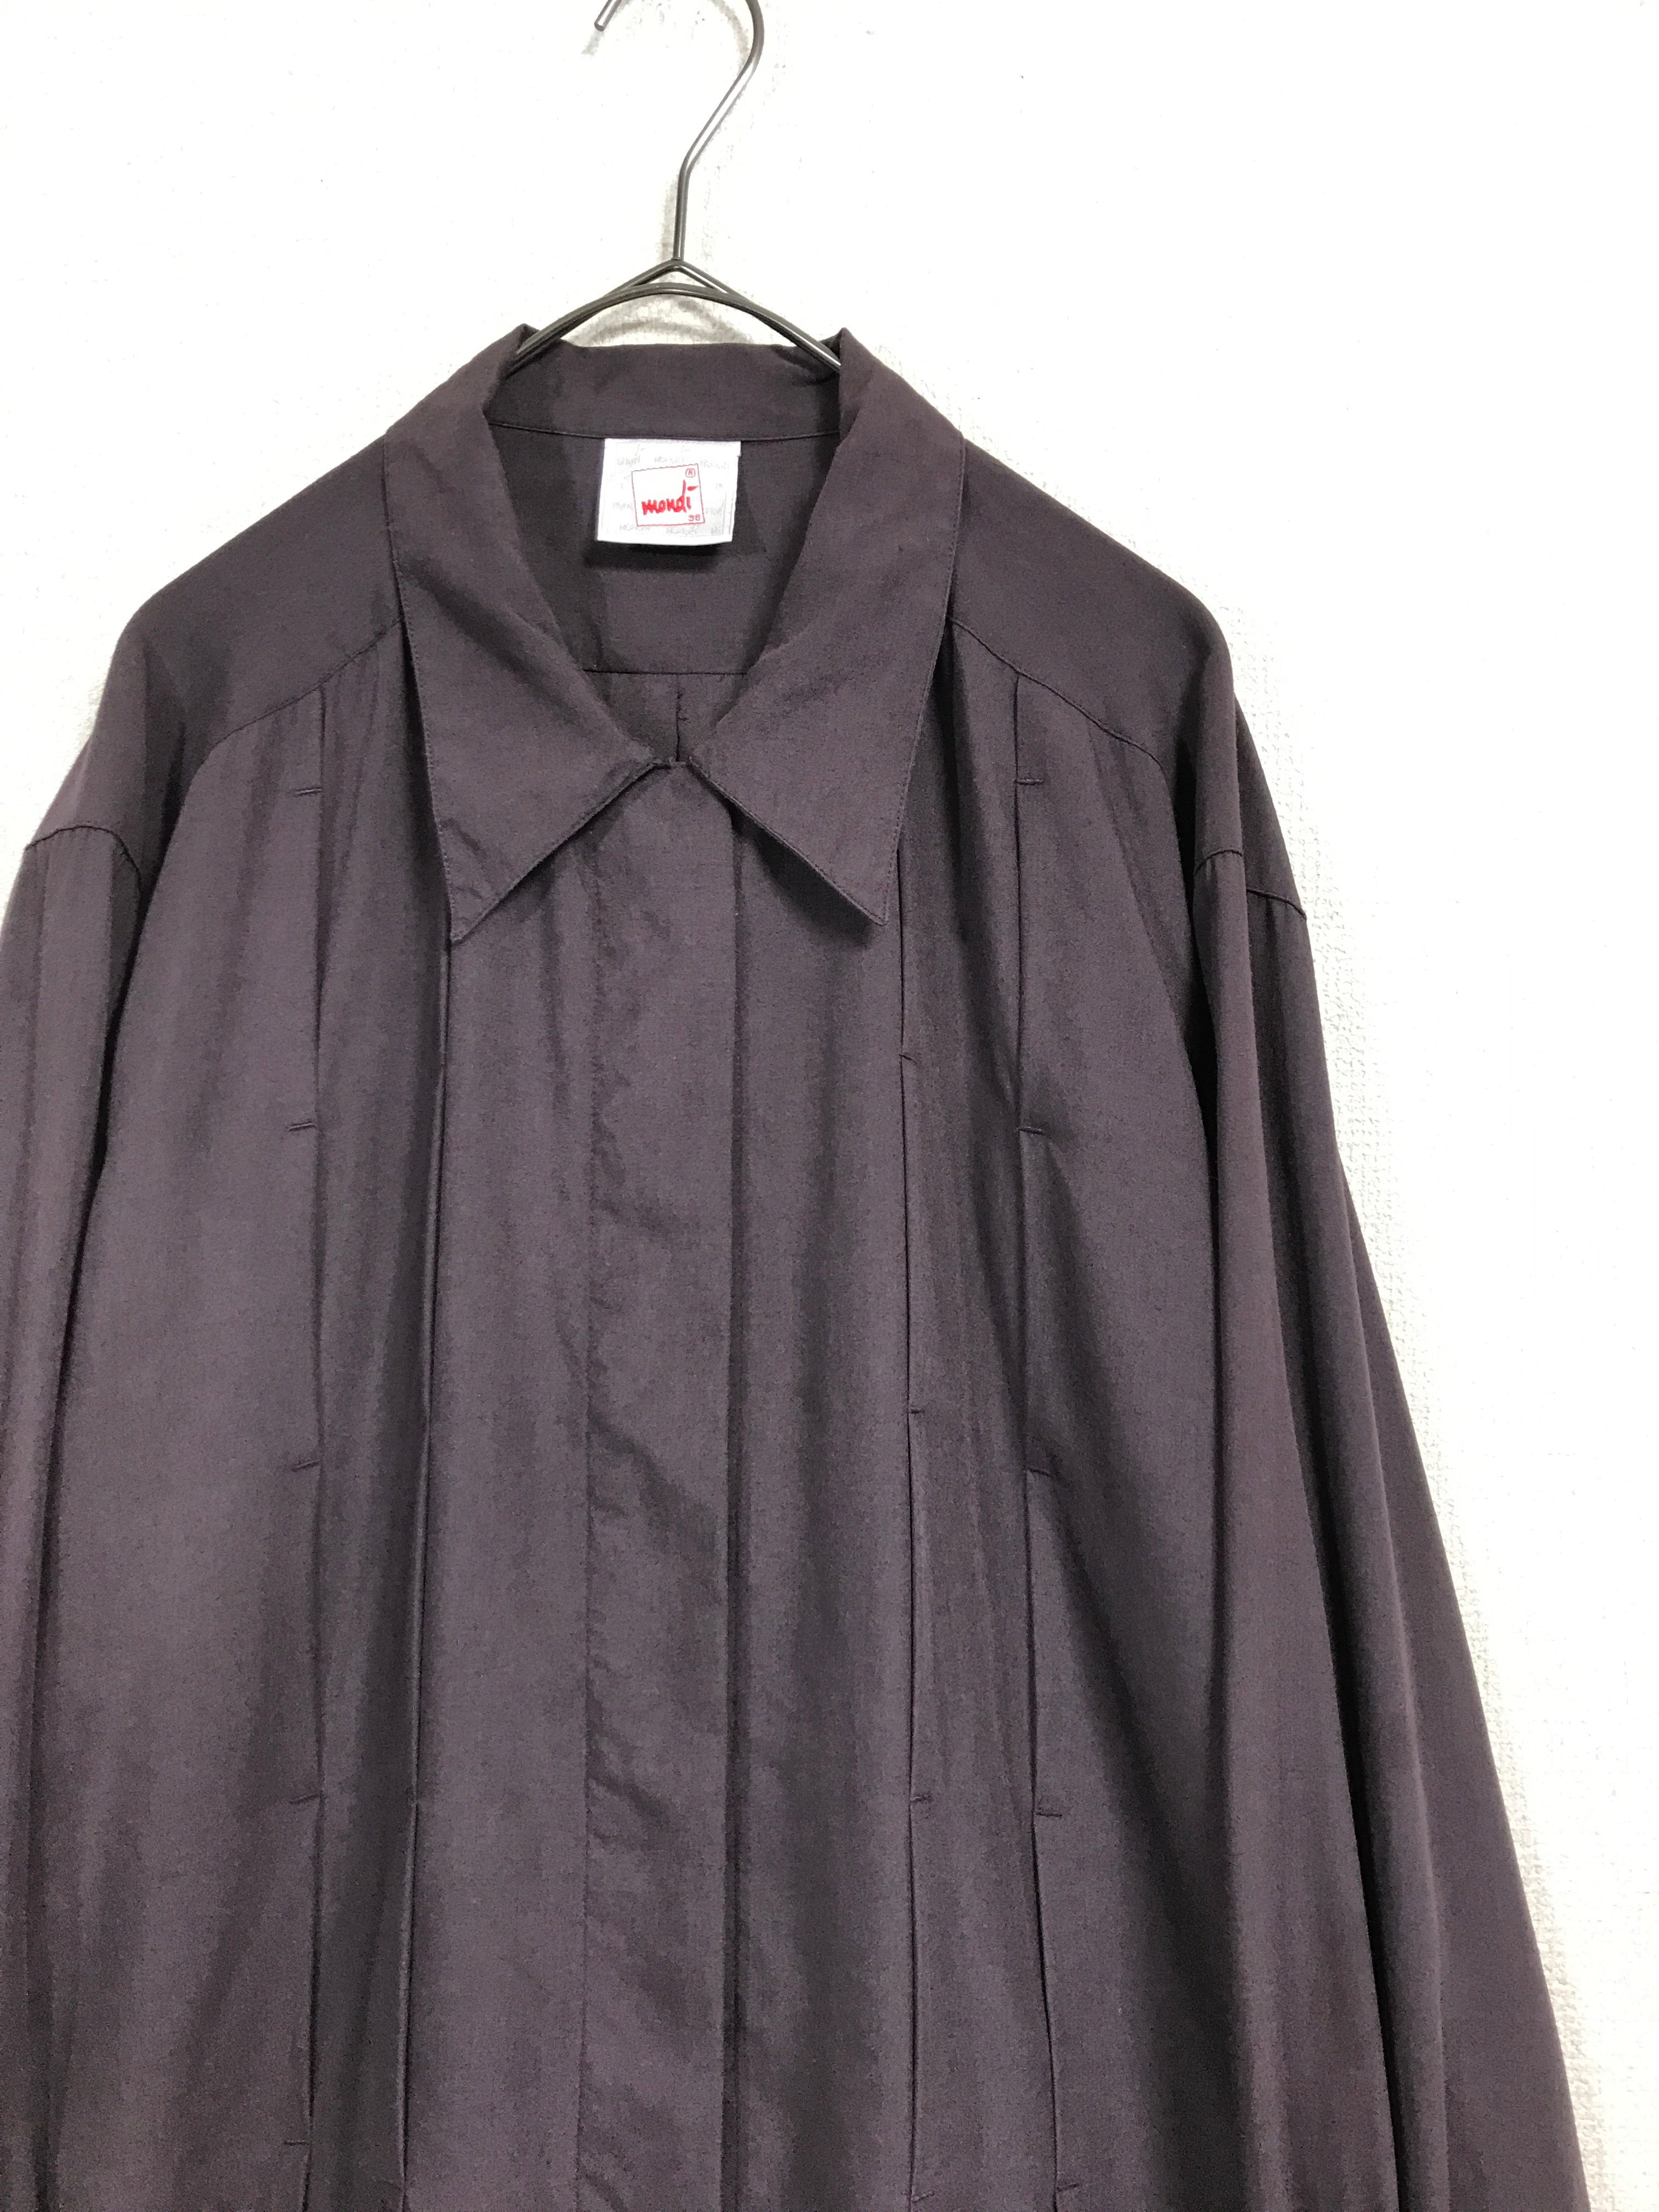 80’s Mondi pleated front rayon blouse from Germany